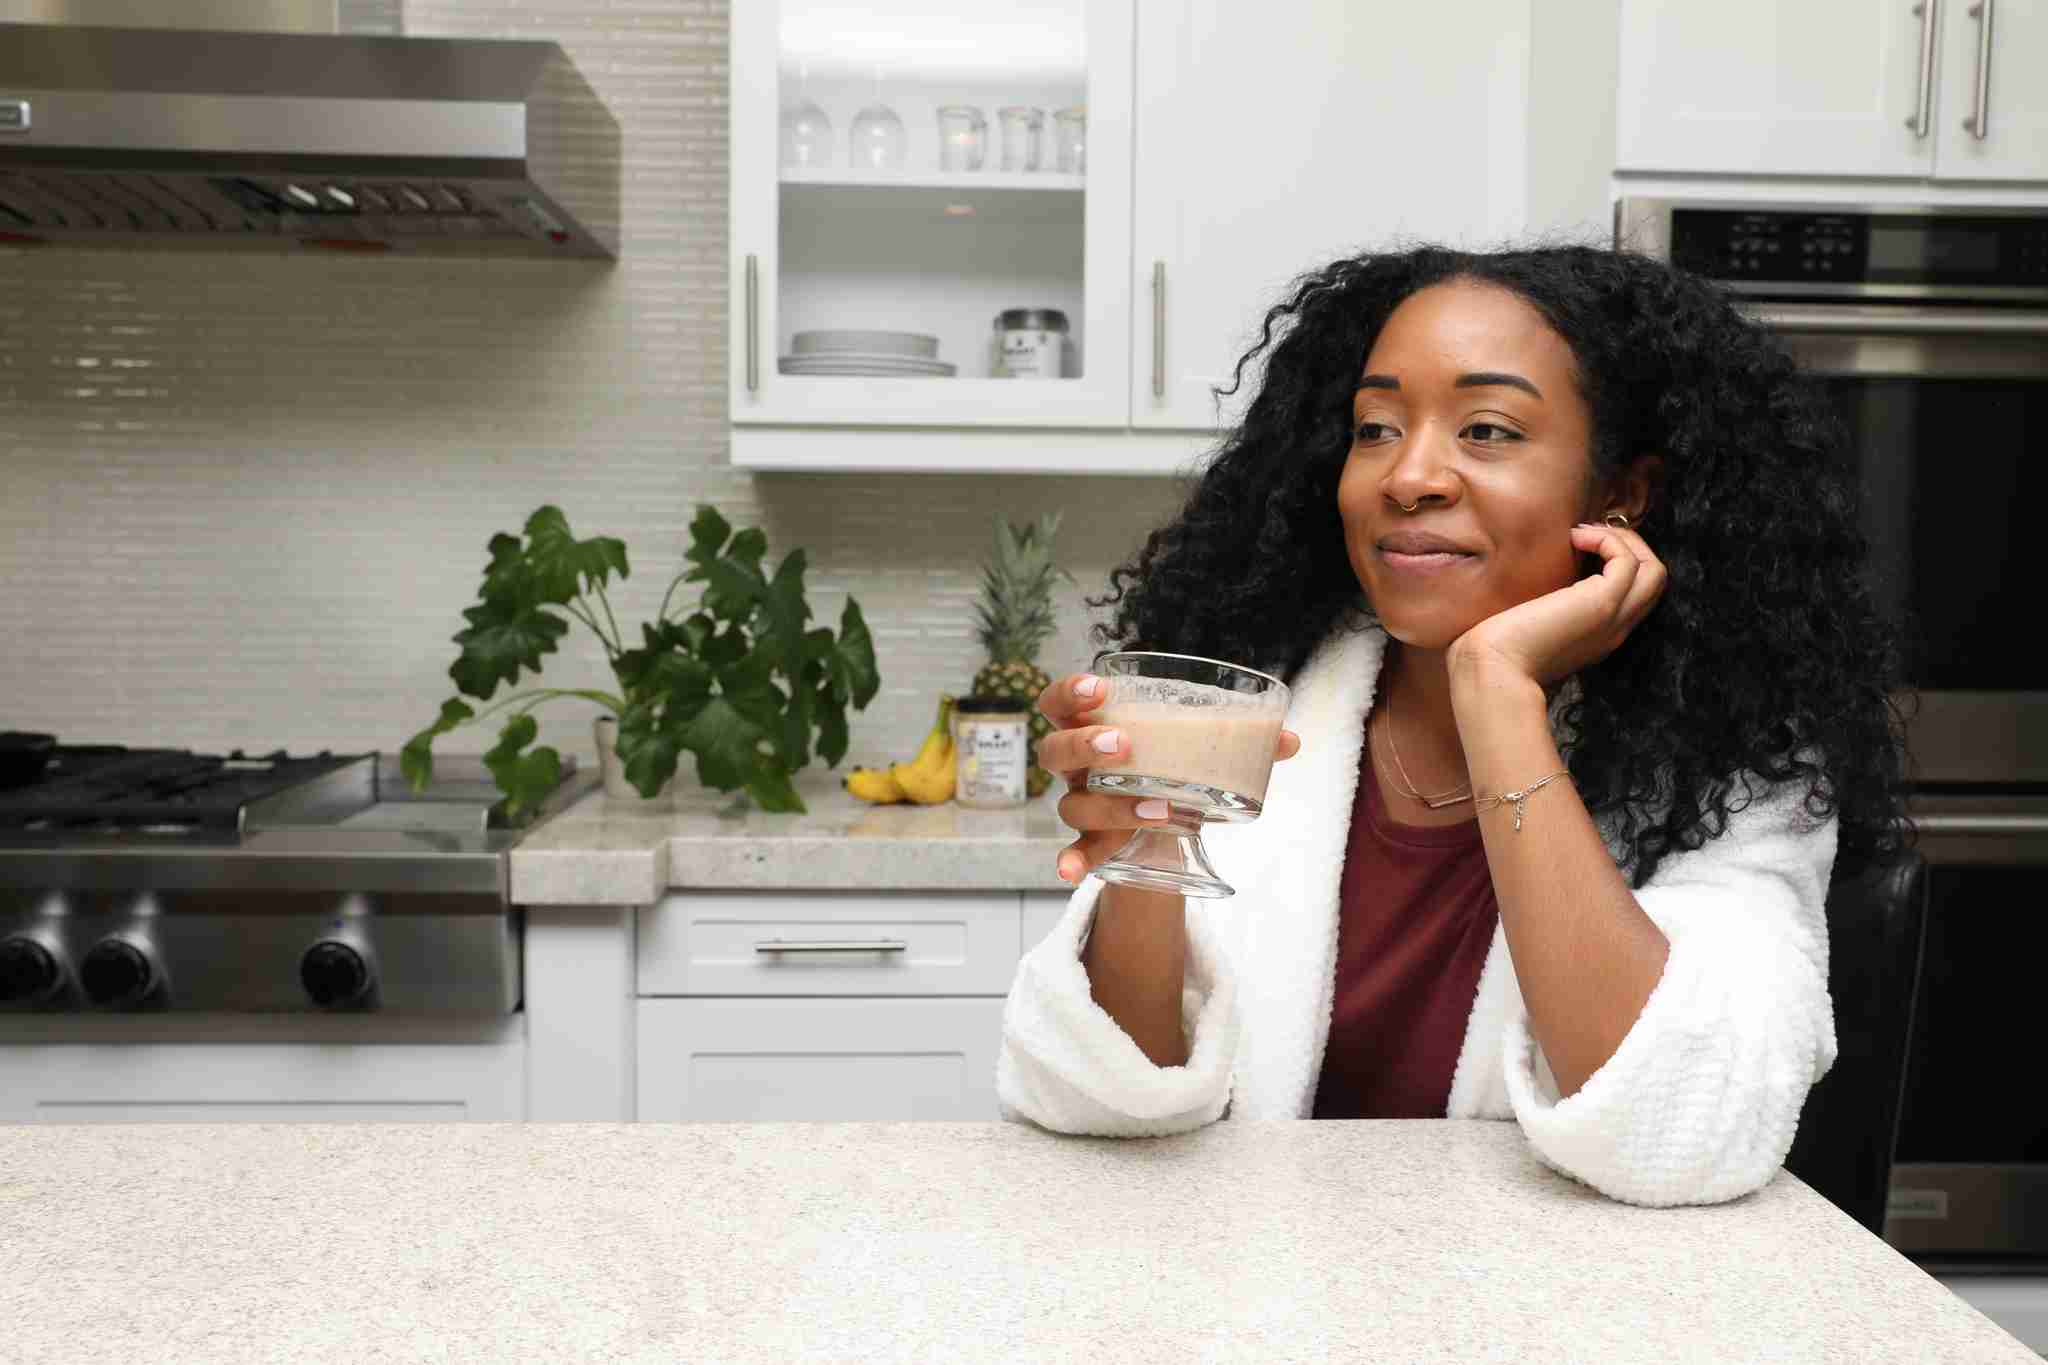 Woman drinking a glass of Smart Pressed Juice